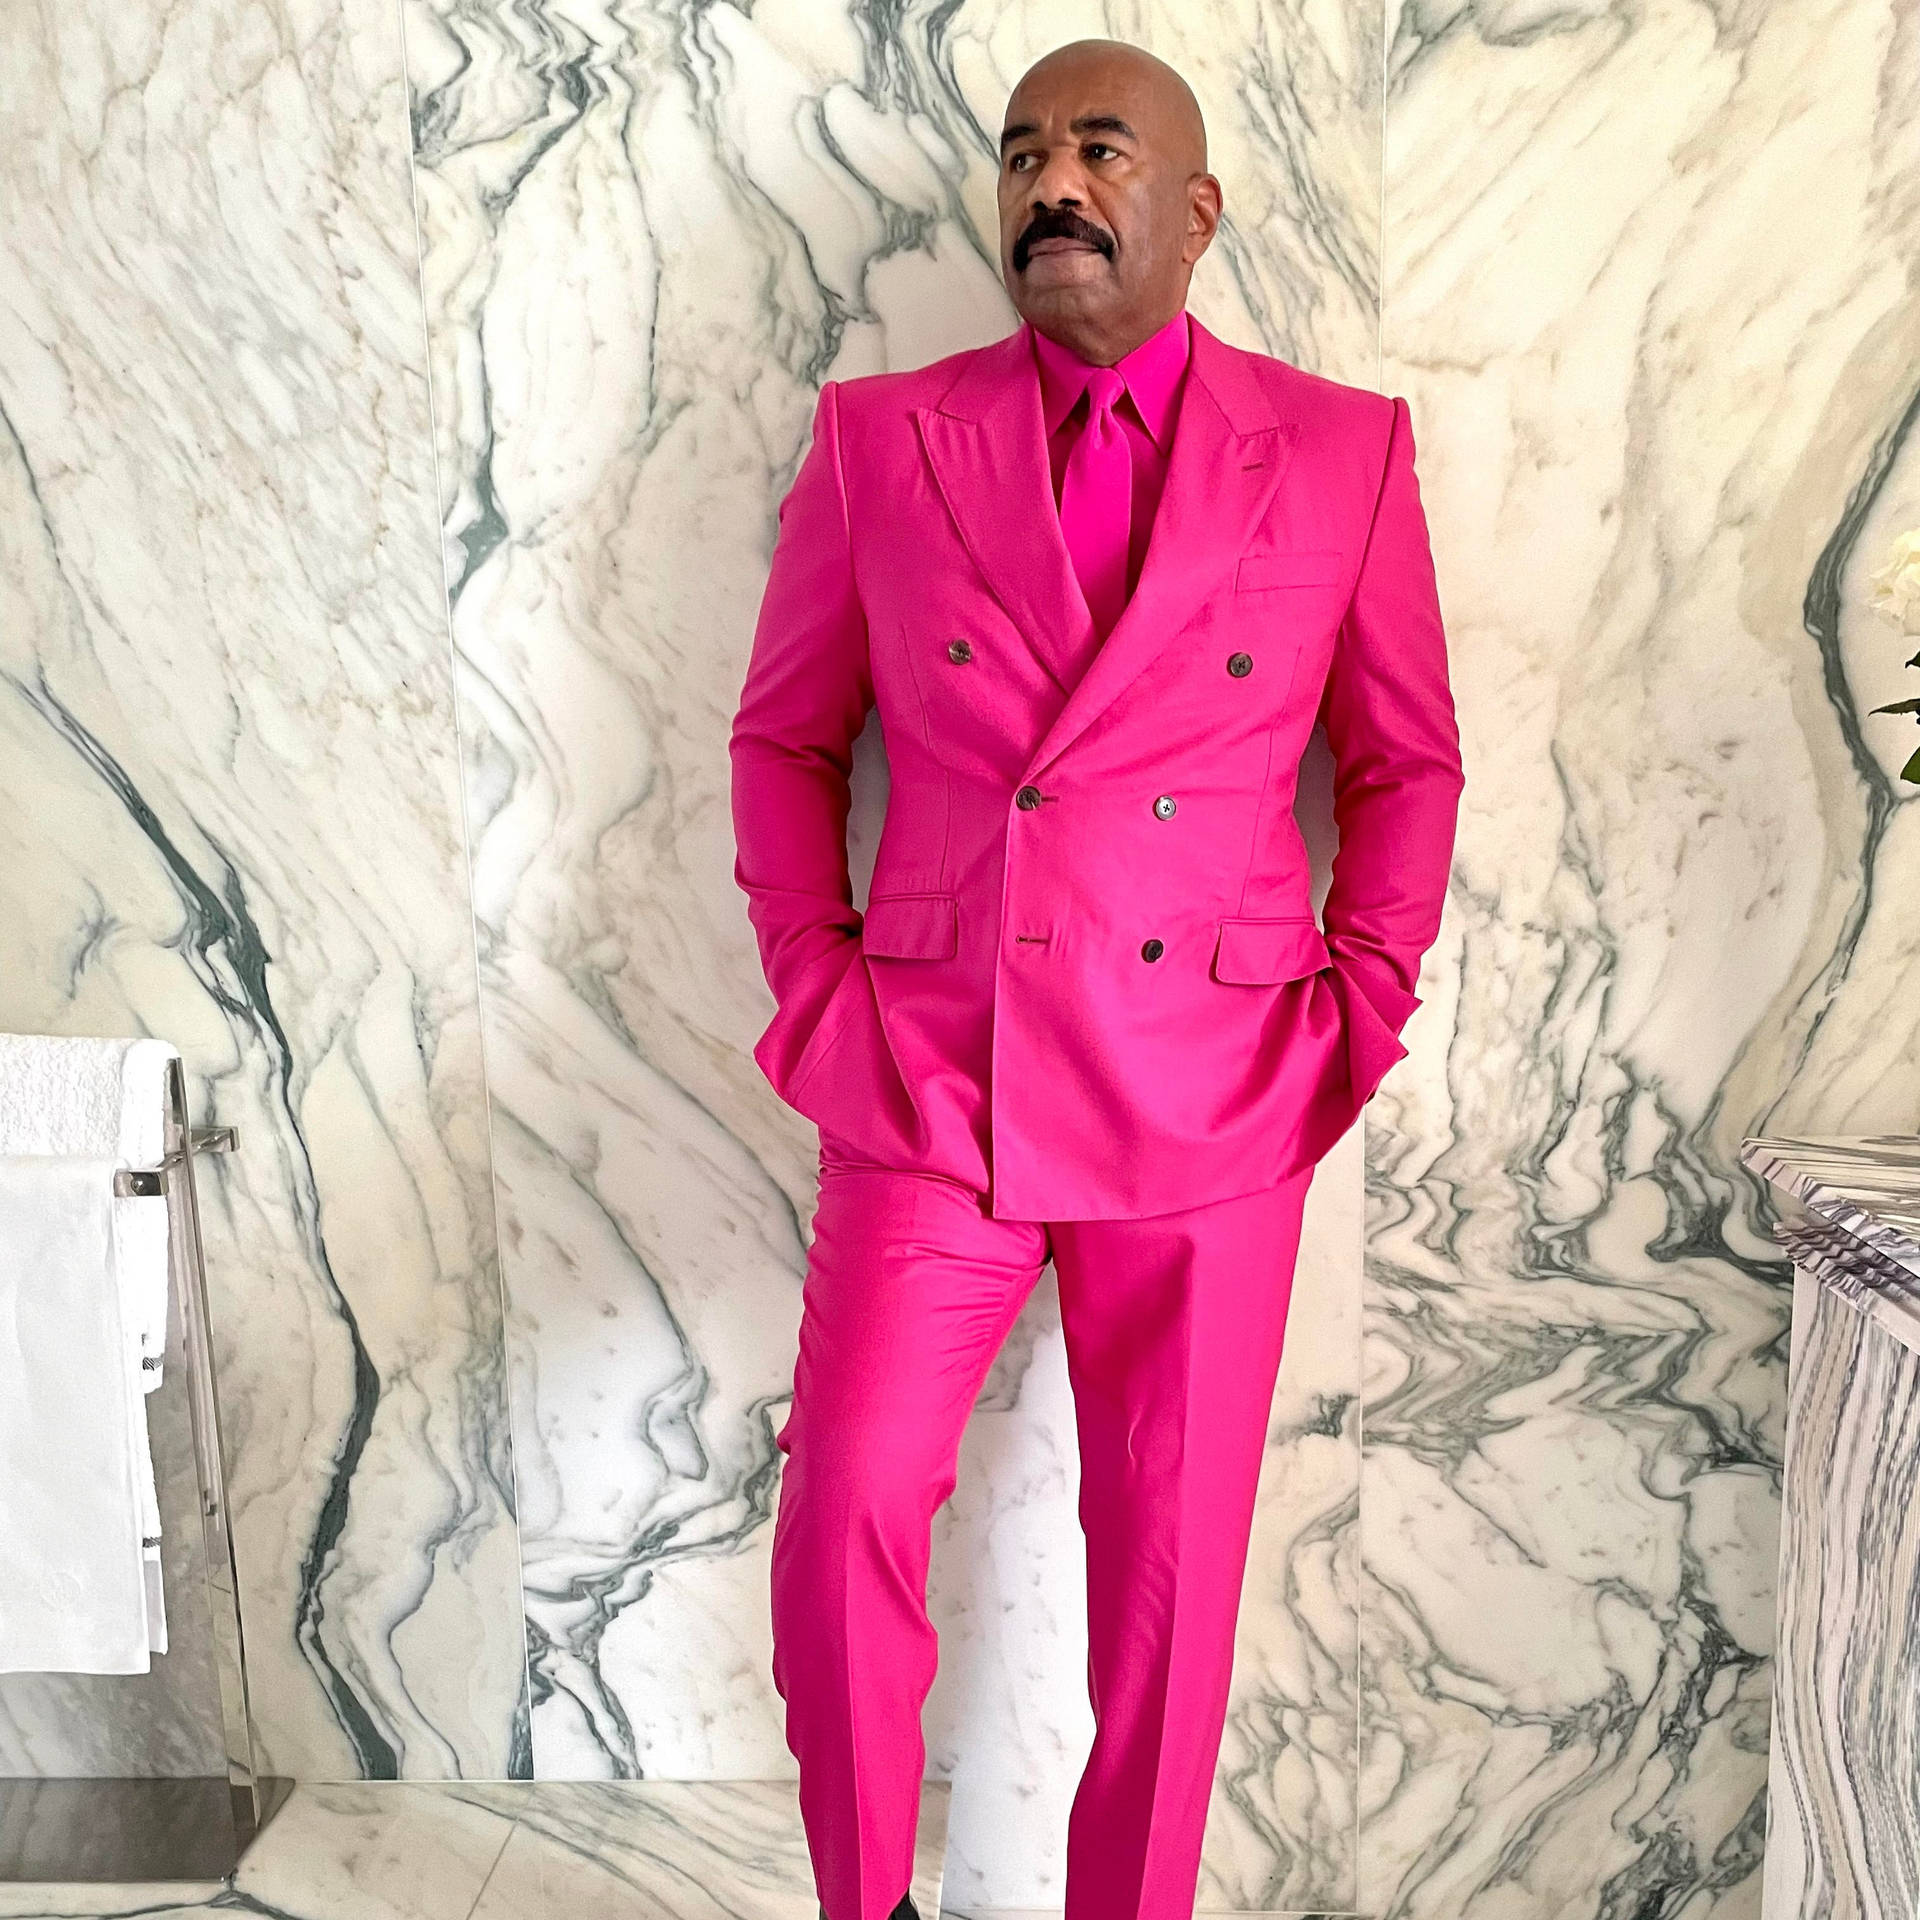 Steve Harvey Vibrantly Stands Out In A Hot Pink Suit Background